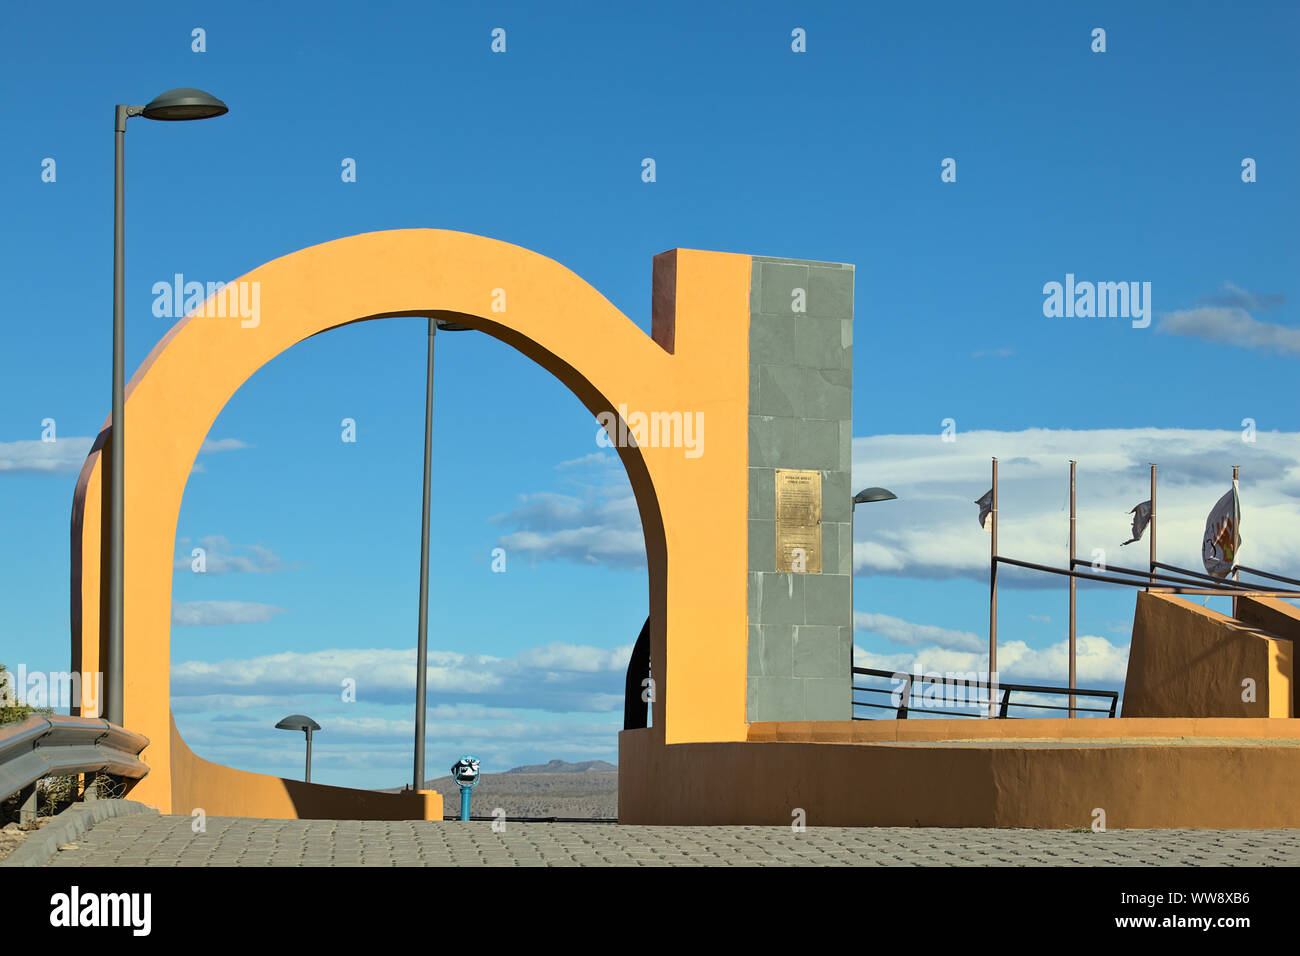 CHILE CHICO, CHILE - FEBRUARY 23, 2016: Arch at the Plaza del Viento (Square of the Wind) scenic viewpoint in Chile Chico, Chile on February 23, 2016 Stock Photo